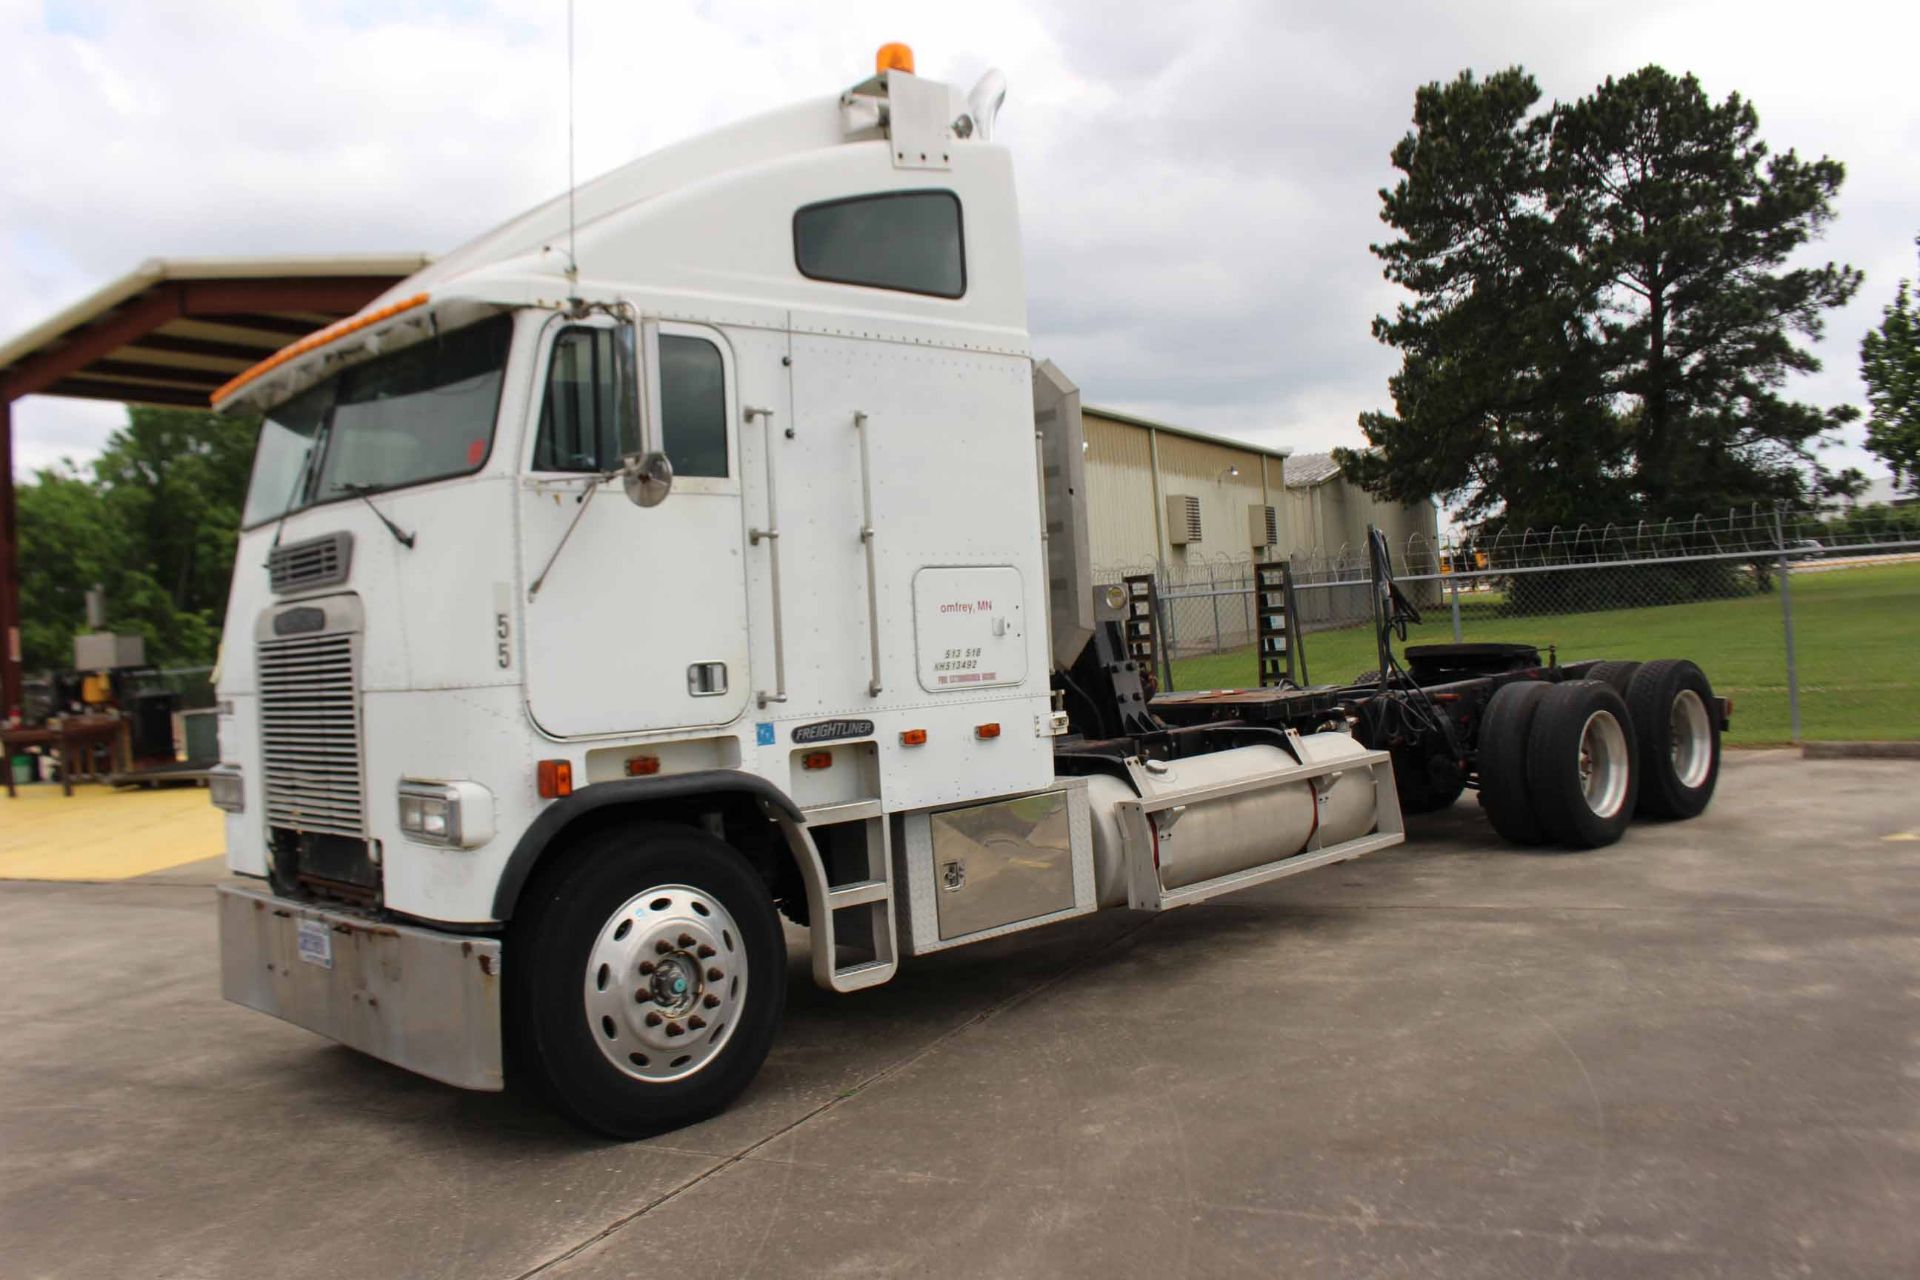 CAB OVER 18-WHEELER TRACTOR TRUCK, FREIGHTLINER, GVWR 52,000, PTO, tandem rear axles, 106949.6 - Image 2 of 6